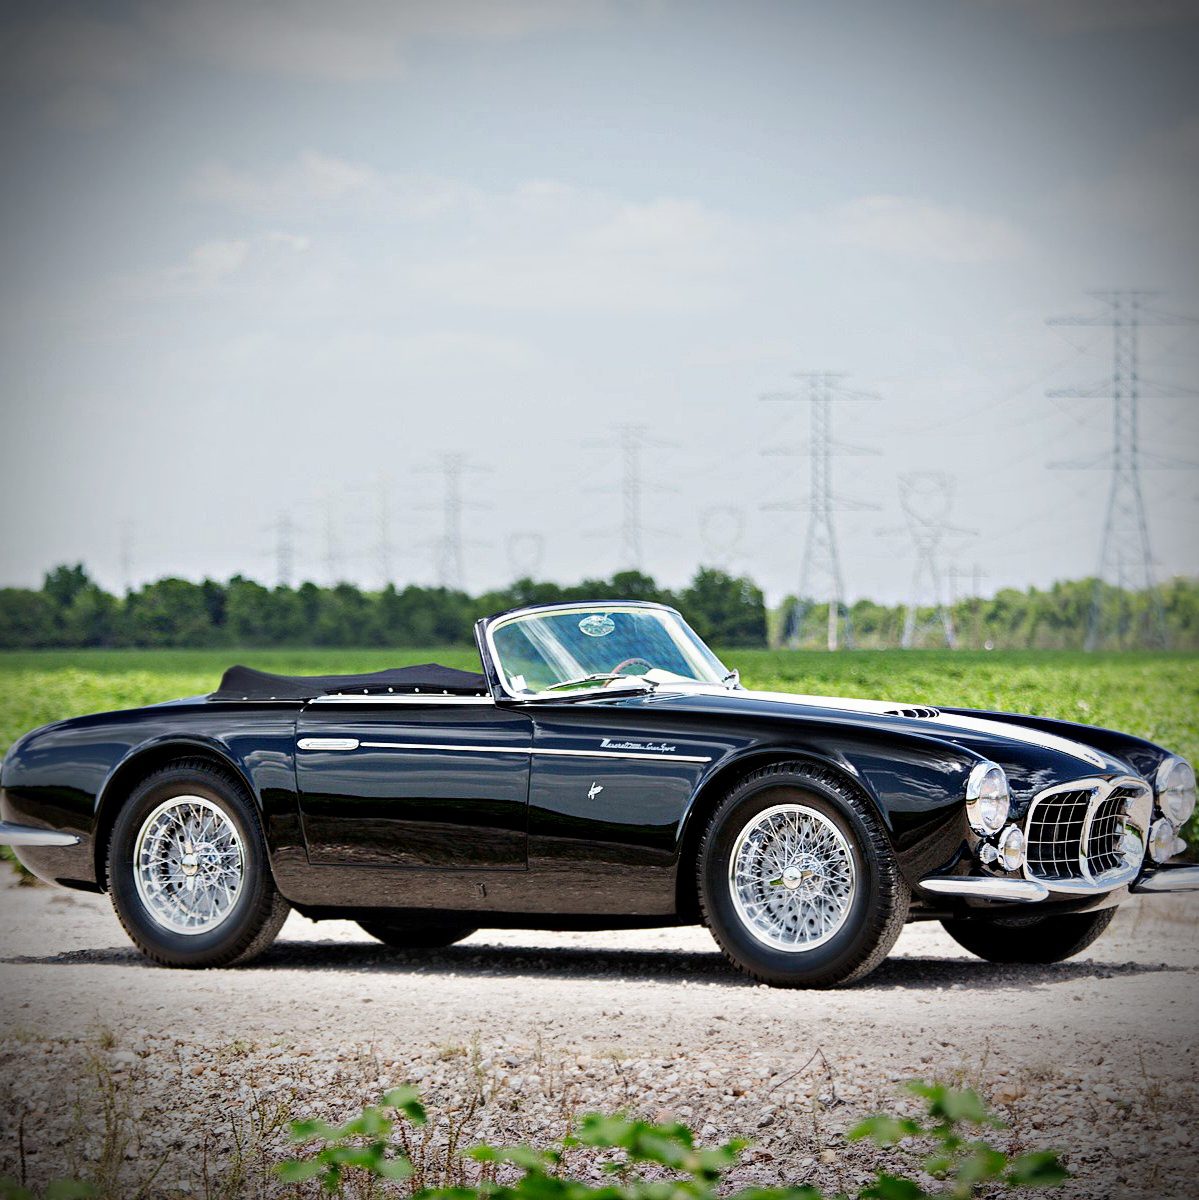 Majestic Ultra-Rare 1950s Maserati Frua Spider to Appear in UK for First Time at September’s Concours of Elegance via 360 MAGAZINE.